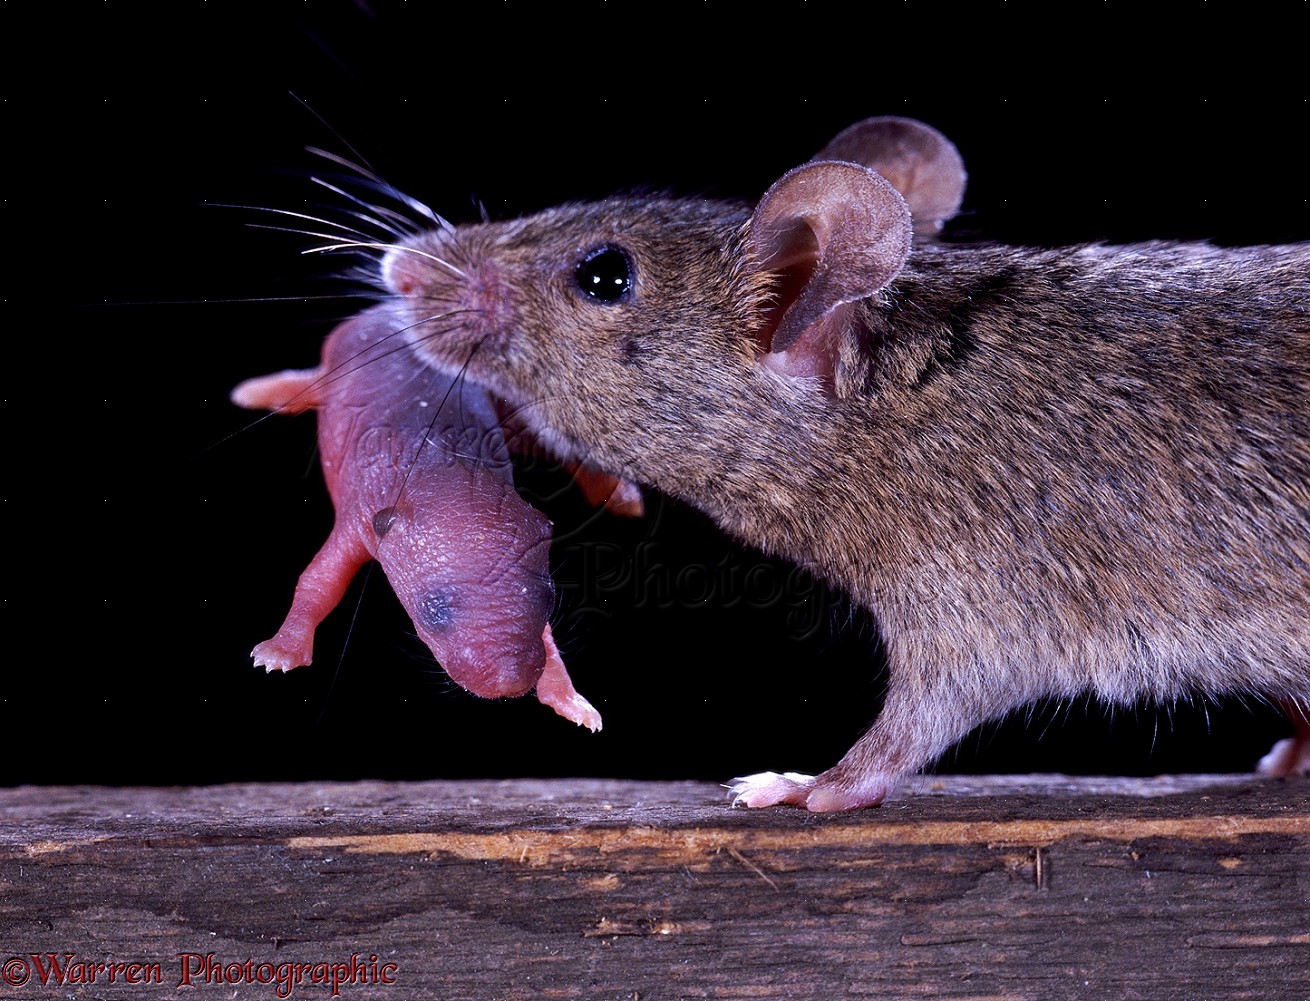 House mouse carrying baby photo WP06634